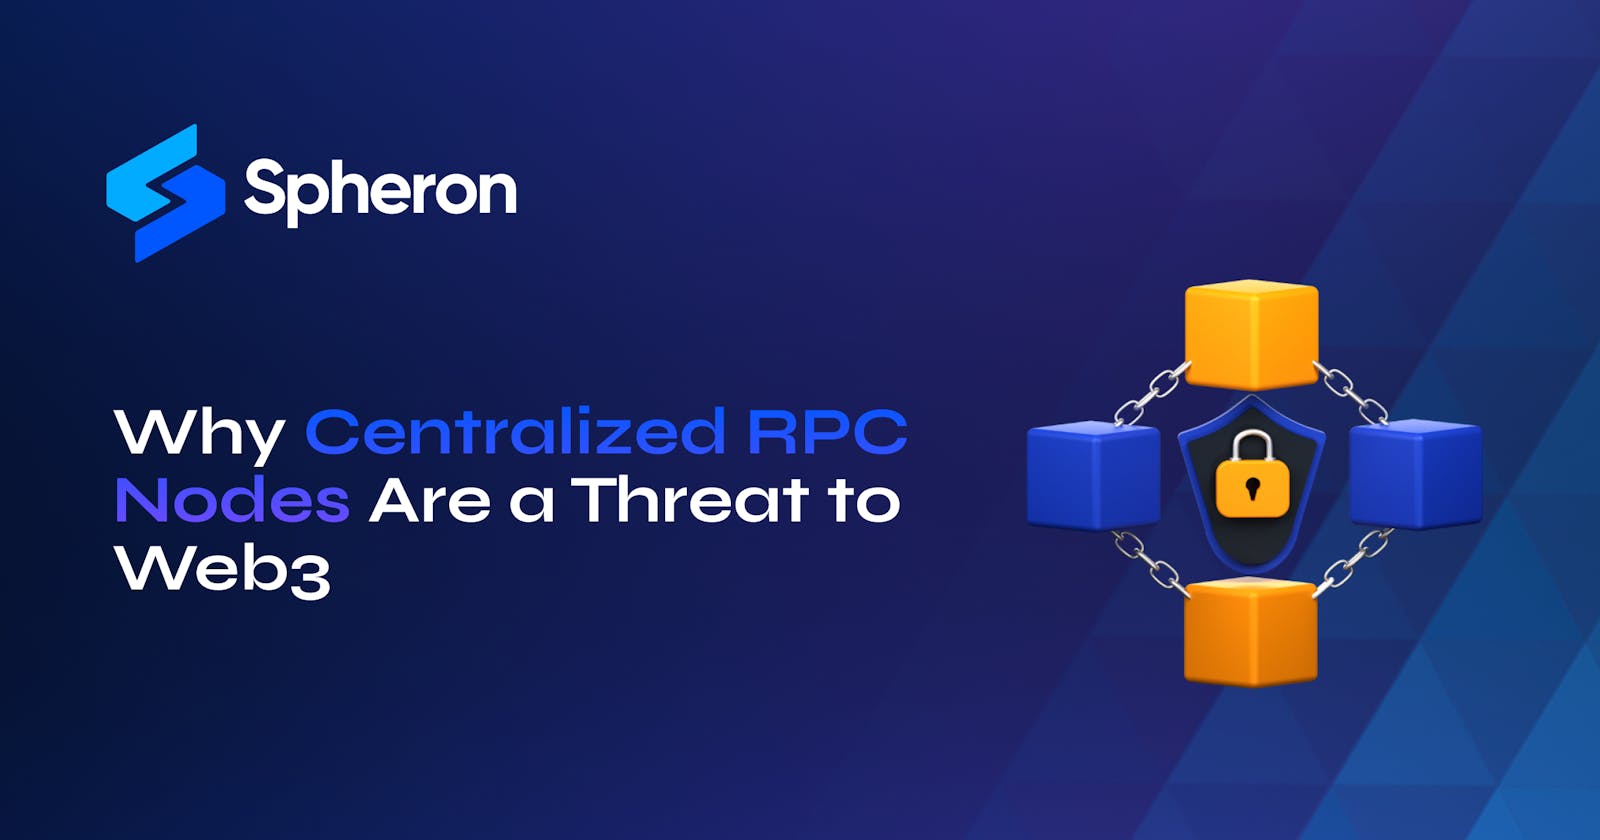 Why Centralized RPC Nodes Are a Threat to Web3